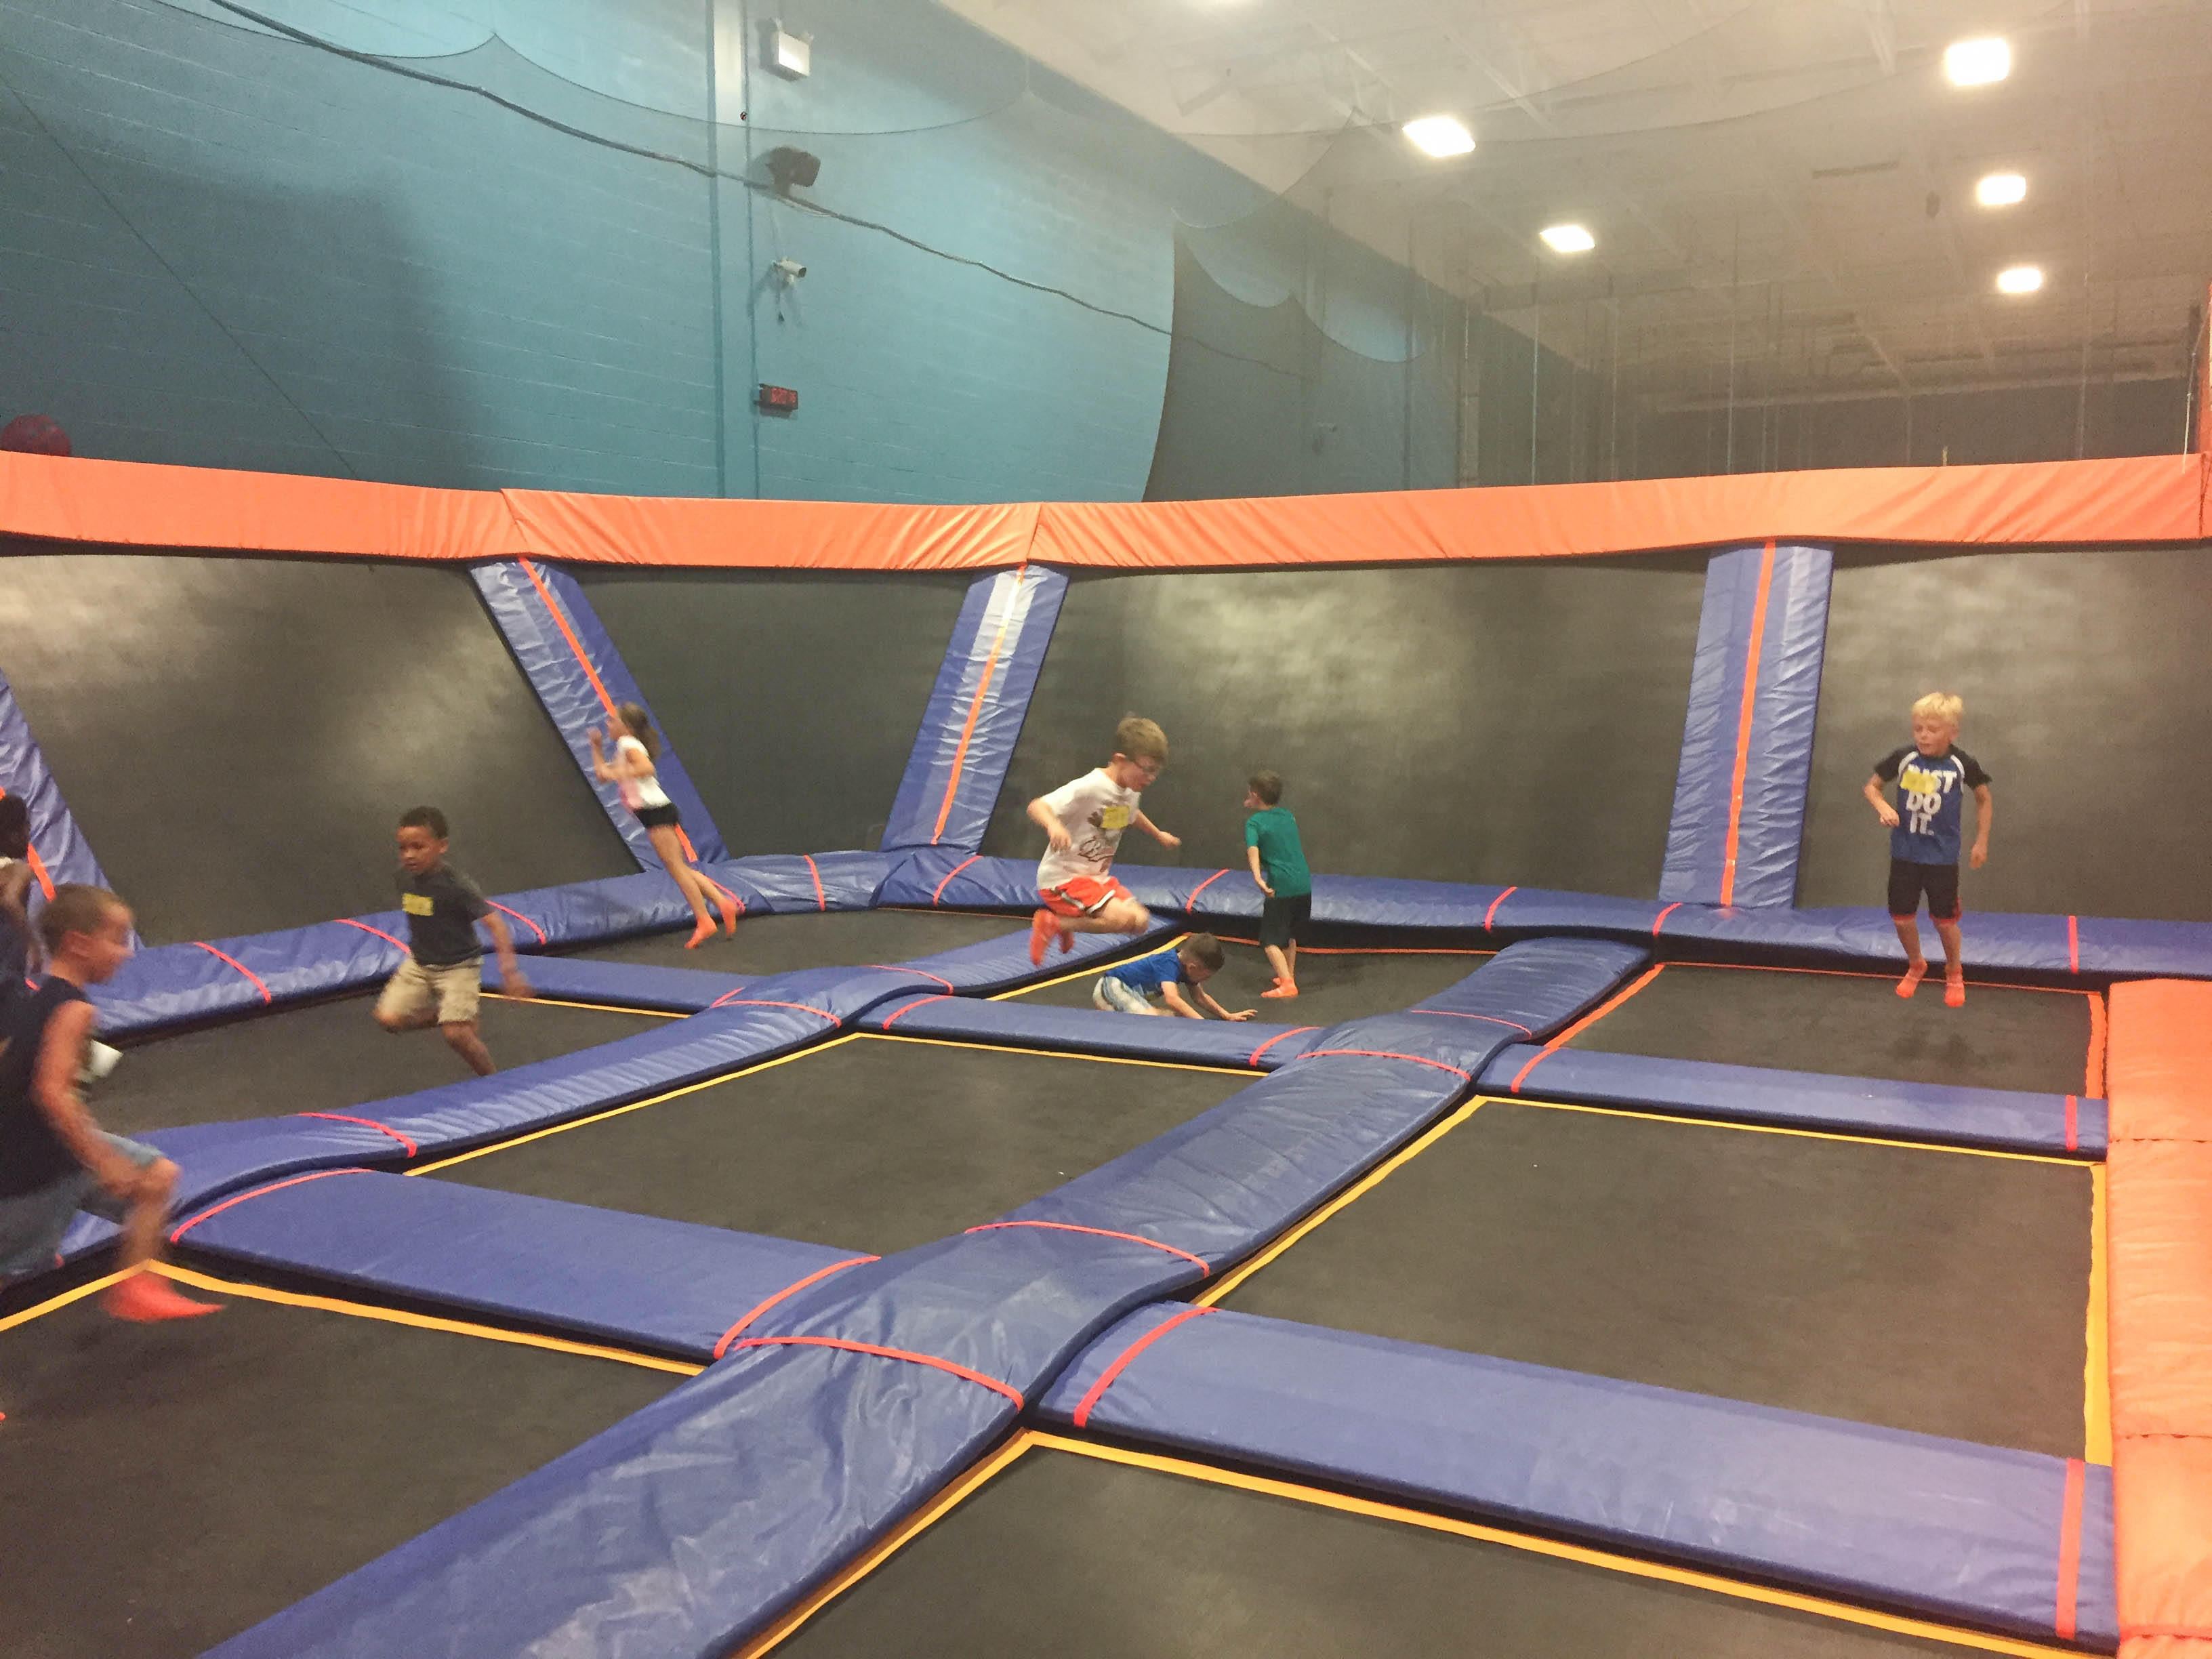 Sky Zone Trampoline Park Birthday Party; Dodgeball court; Livin' Life with Style